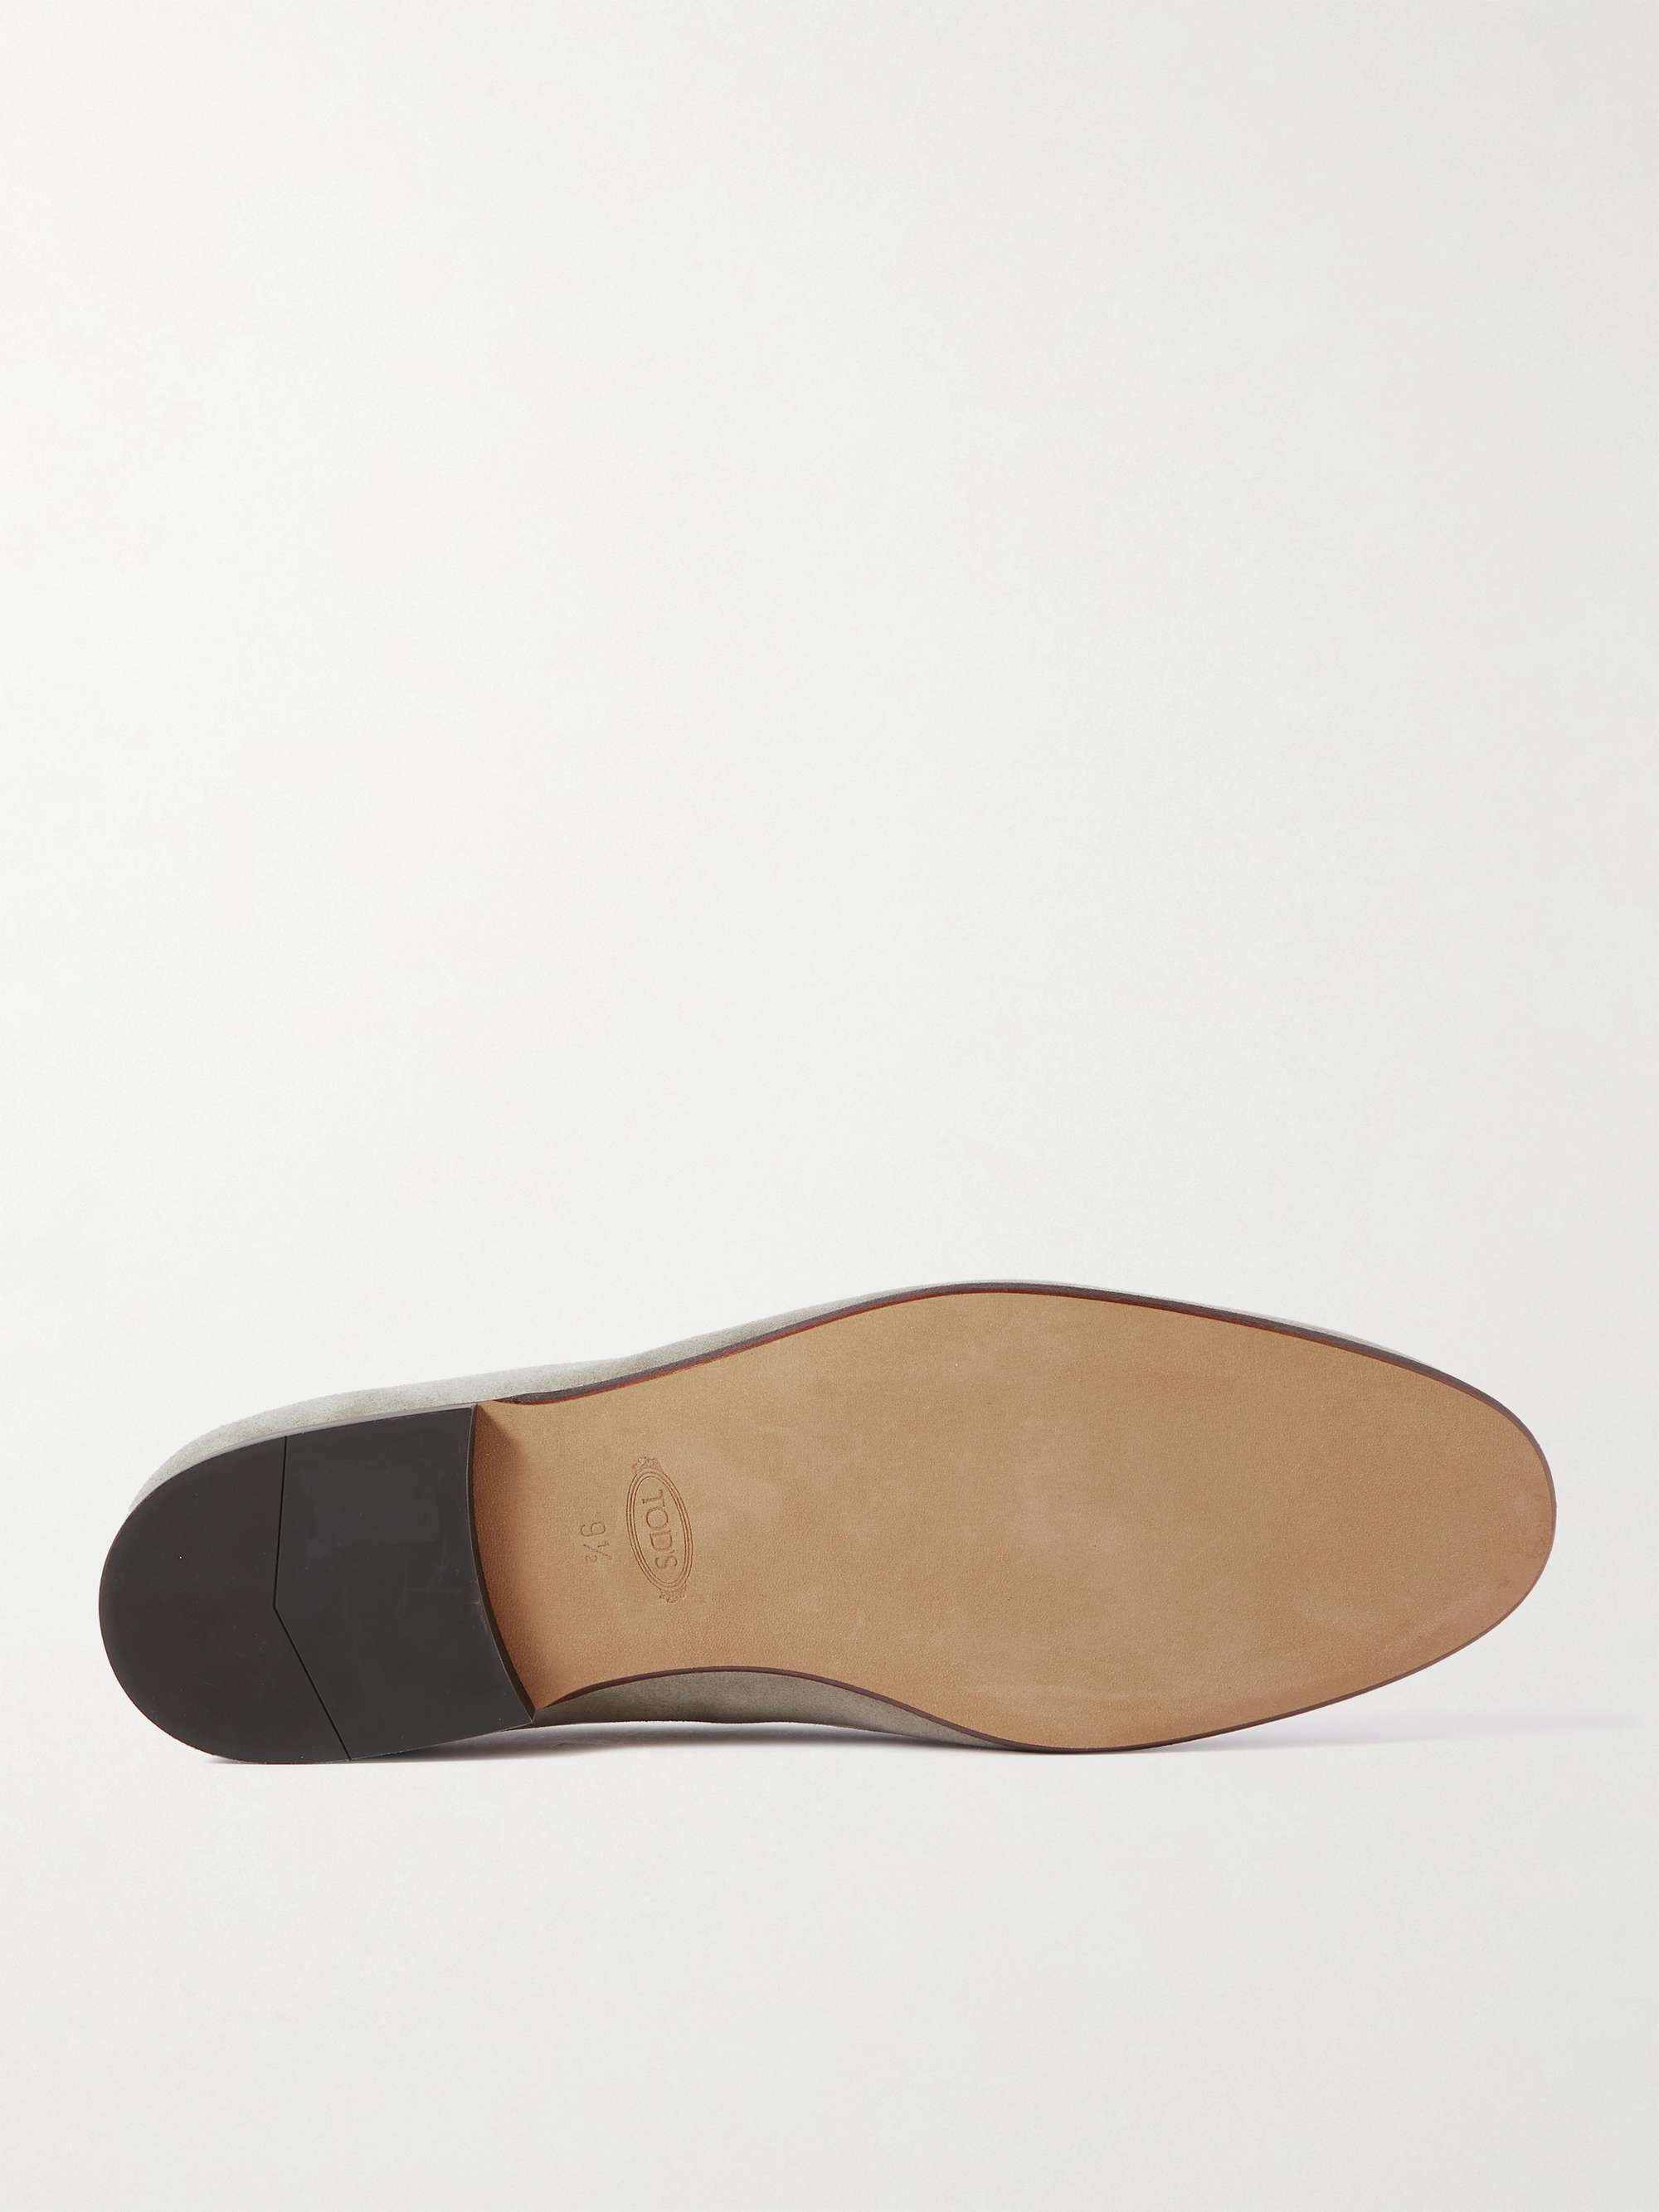 TOD'S Suede Penny Loafers